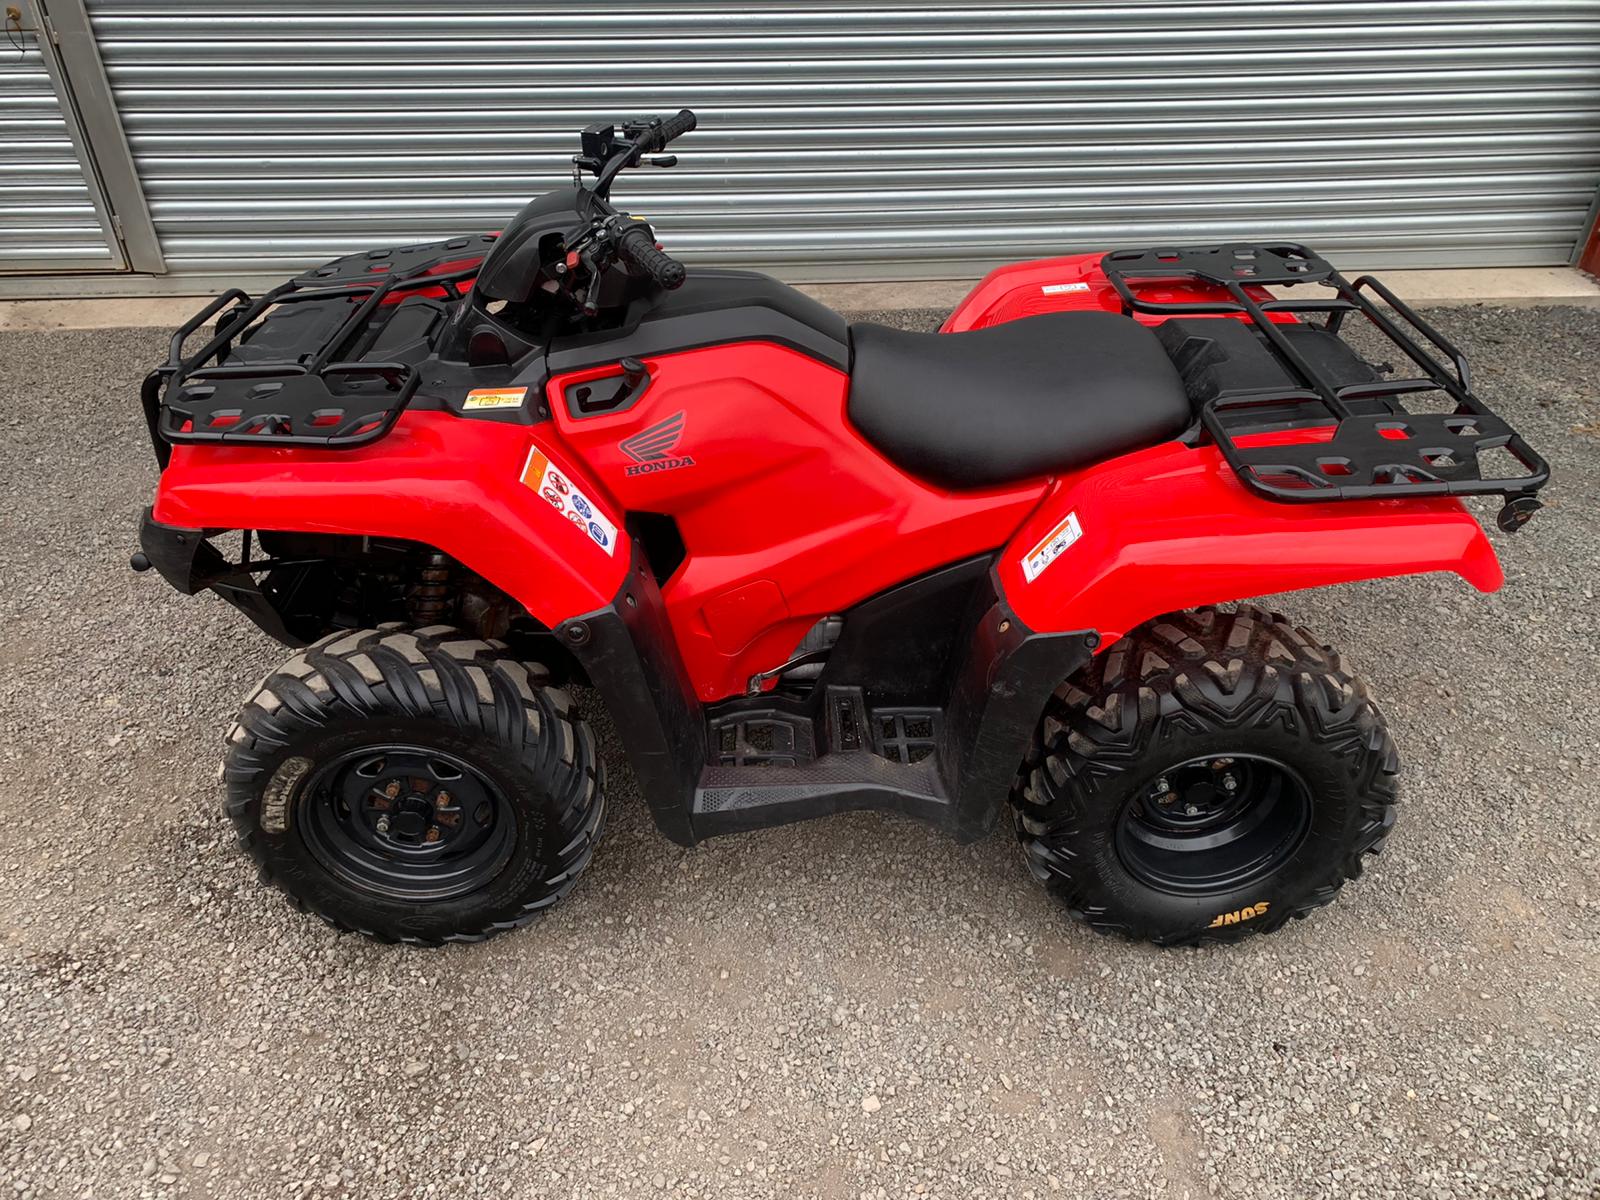 Bid on HONDA TRX420FM2 4X4 ATV: 810 HOURS & POWER STEERING- Buy &amp; Sell on Auction with EAMA Group